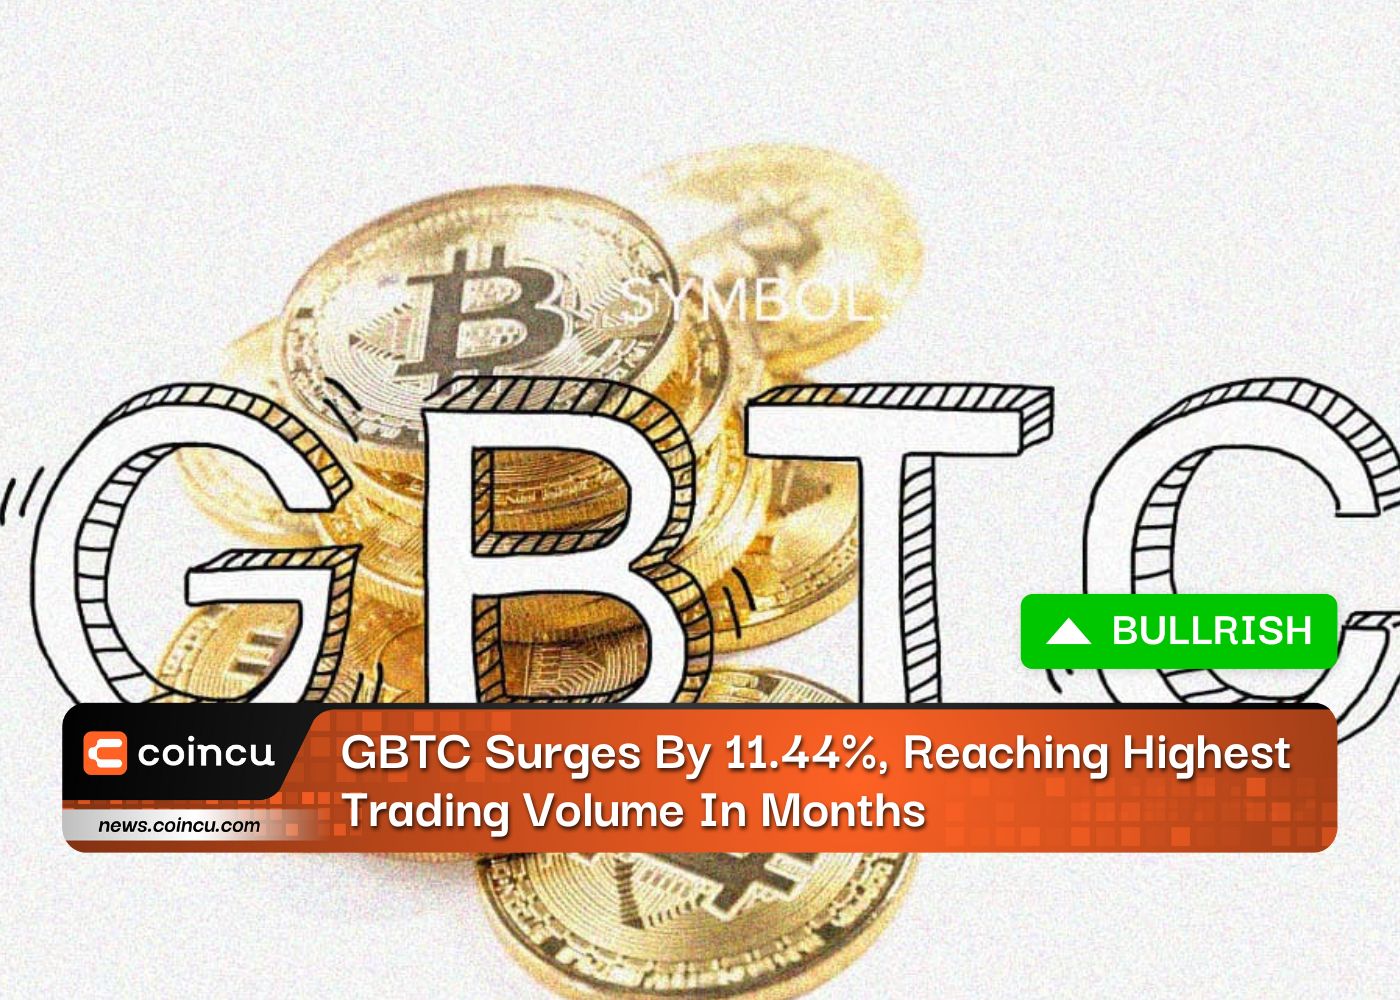 GBTC Surges By 11.44%, Reaching Highest Trading Volume In Months